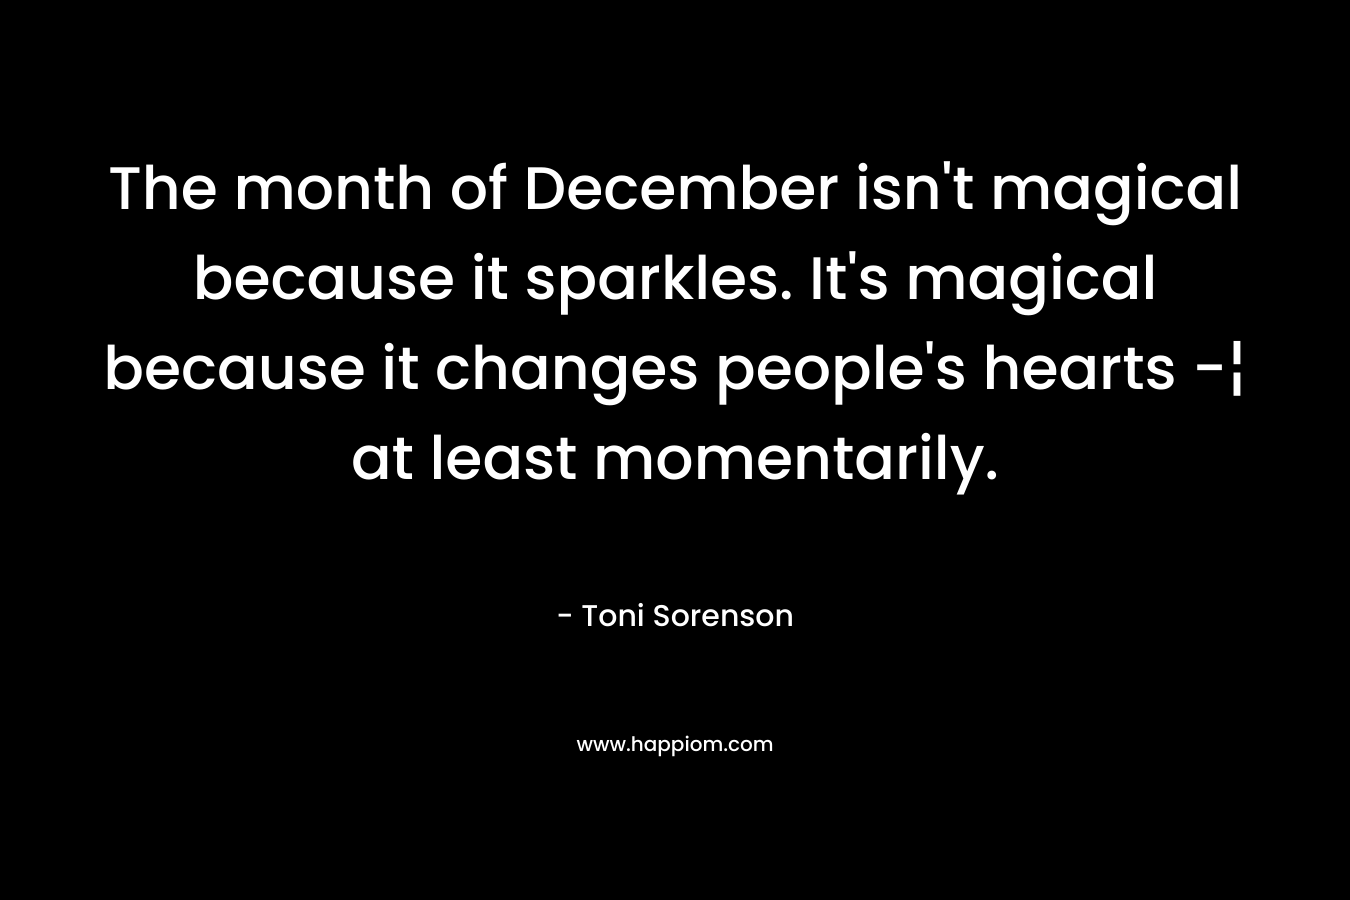 The month of December isn’t magical because it sparkles. It’s magical because it changes people’s hearts -¦ at least momentarily. – Toni Sorenson